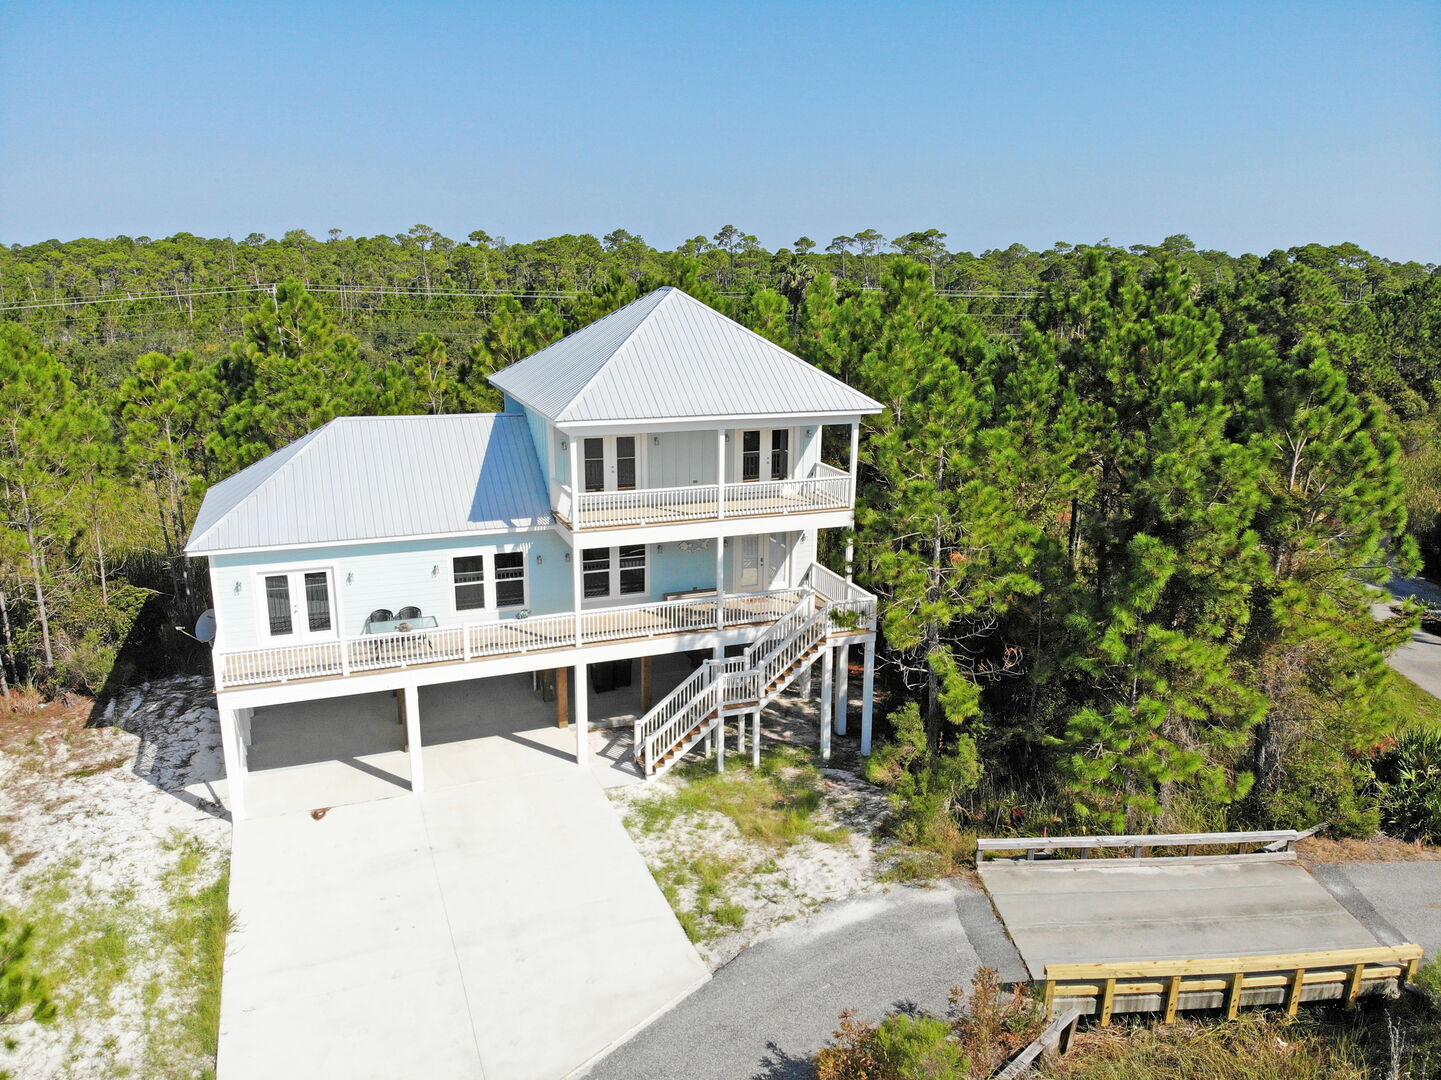 Check out our holiday rentals in Perdido Key